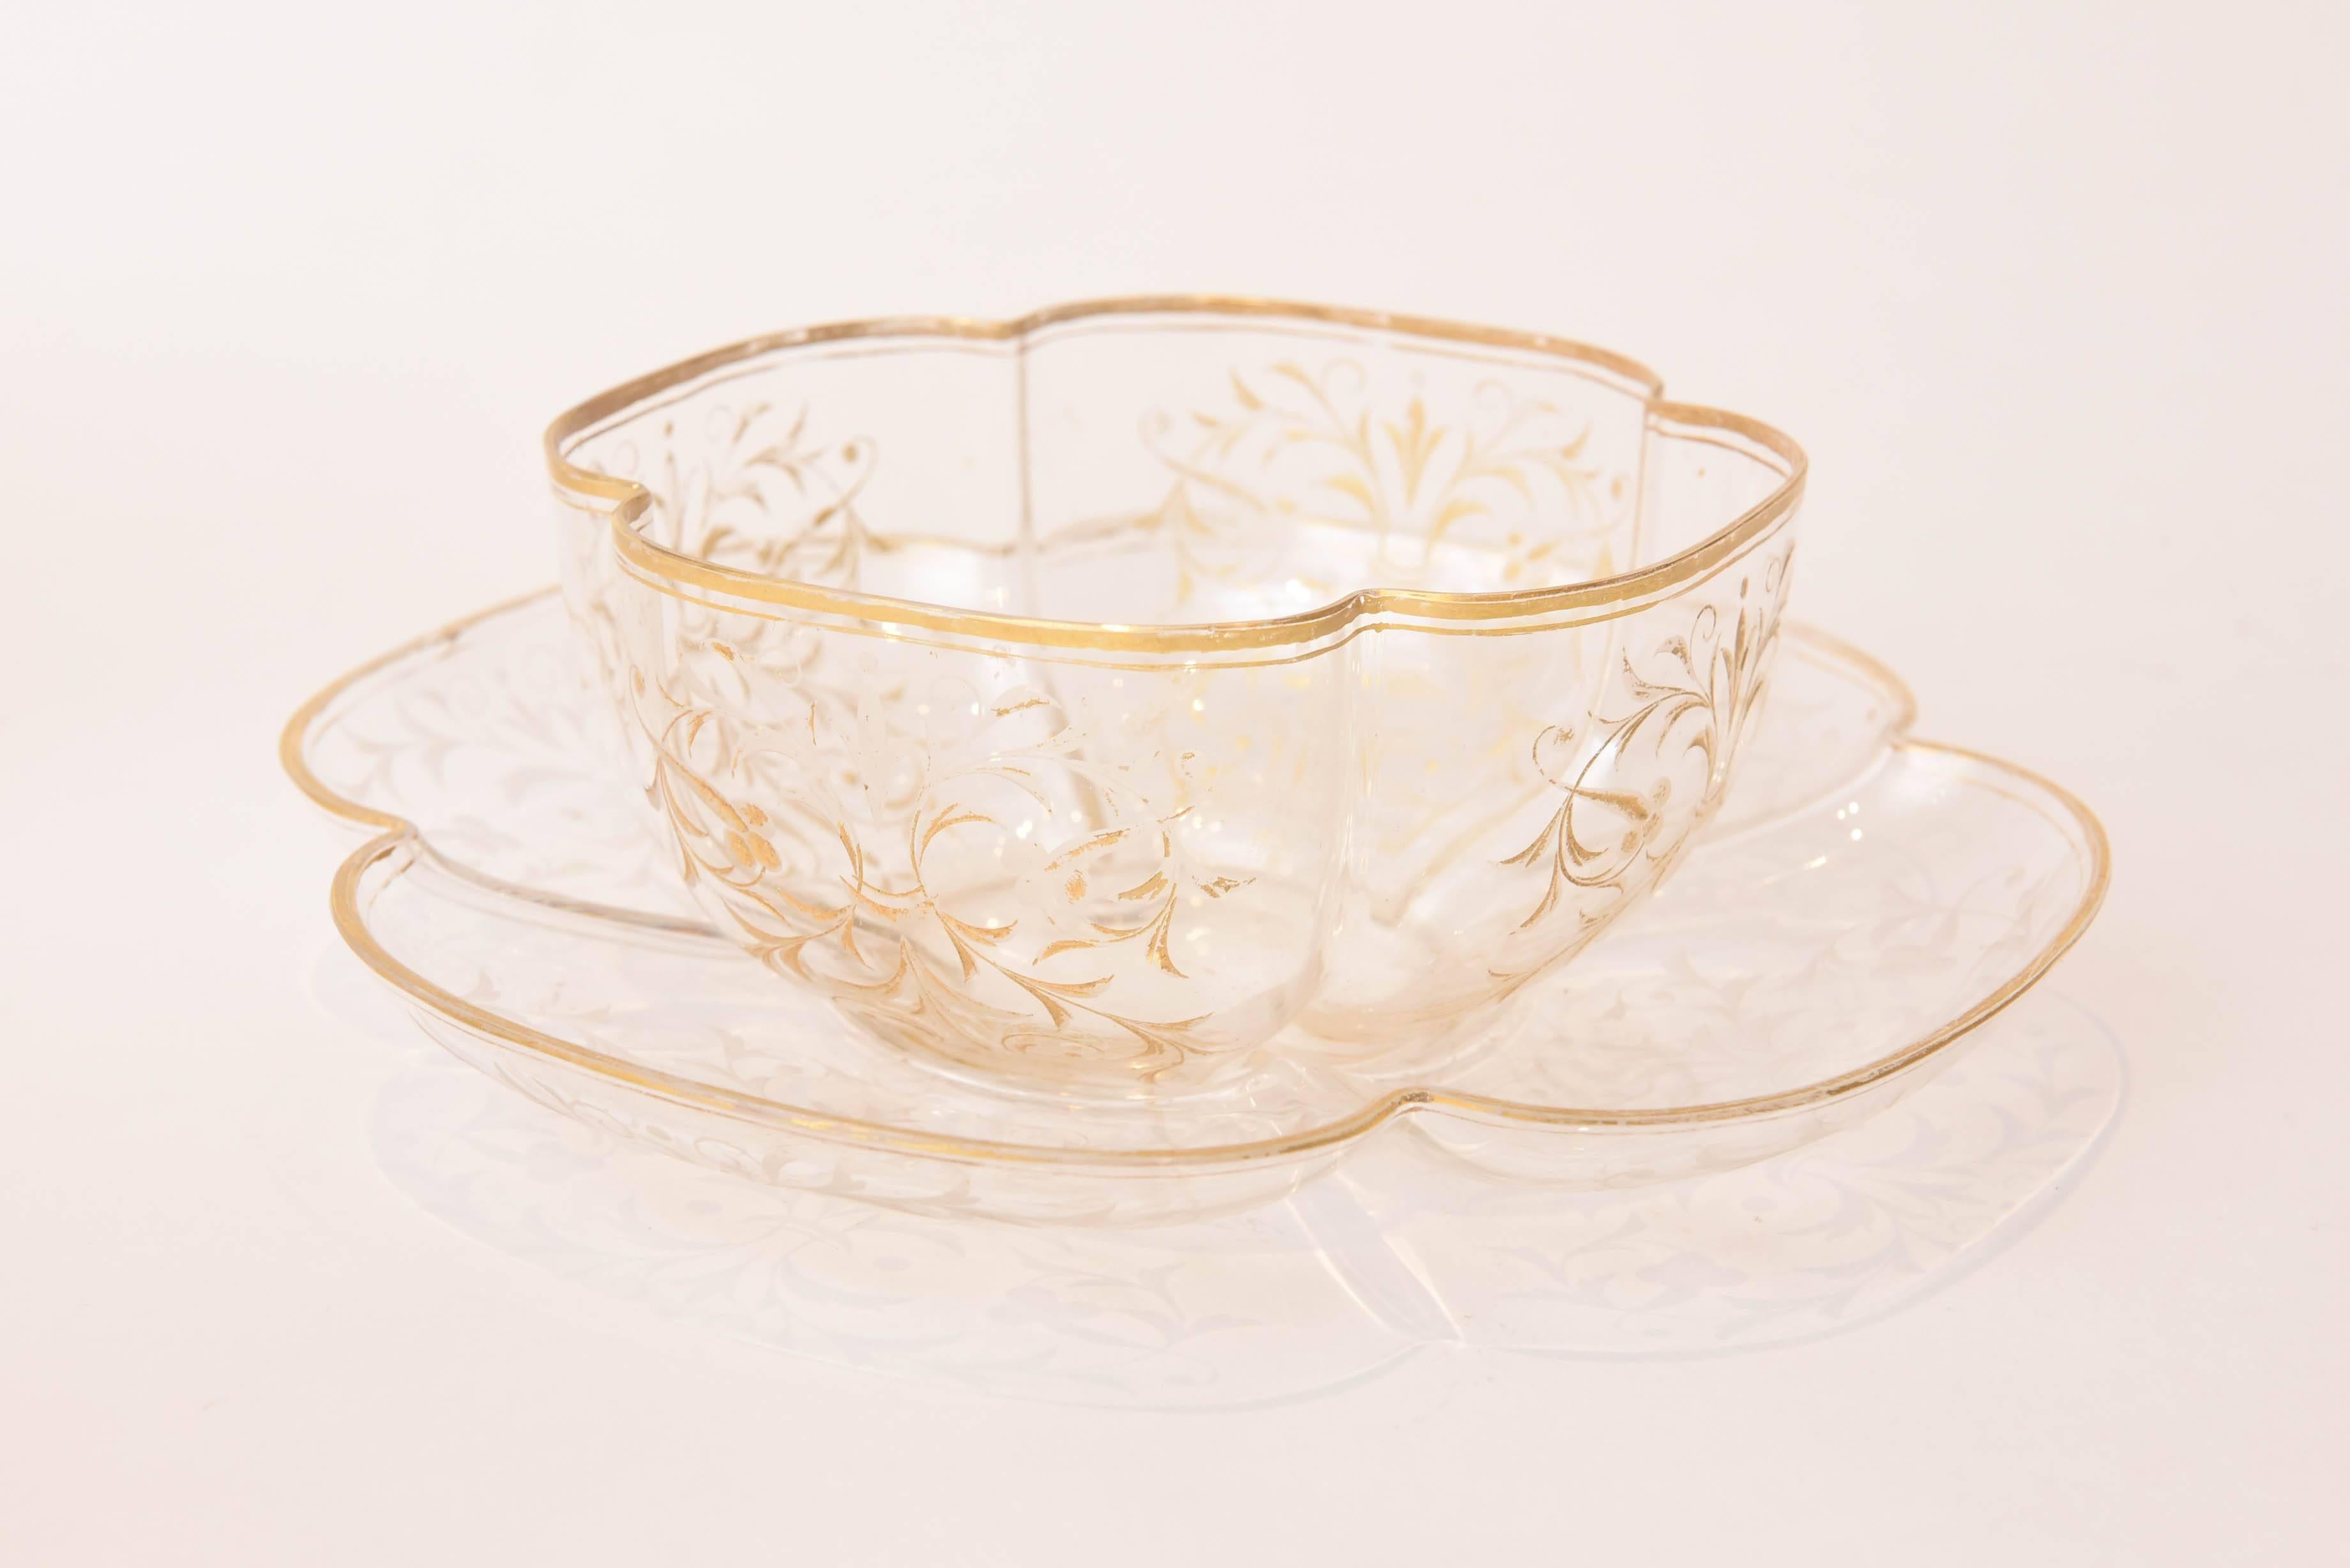 A charming and practical set of ten last quarter of the 19th century moser bowls and underplates in an all-over engraved floral design trimmed in gold. A beautiful and hard to create free blown design that is in wonderful antique condition with no